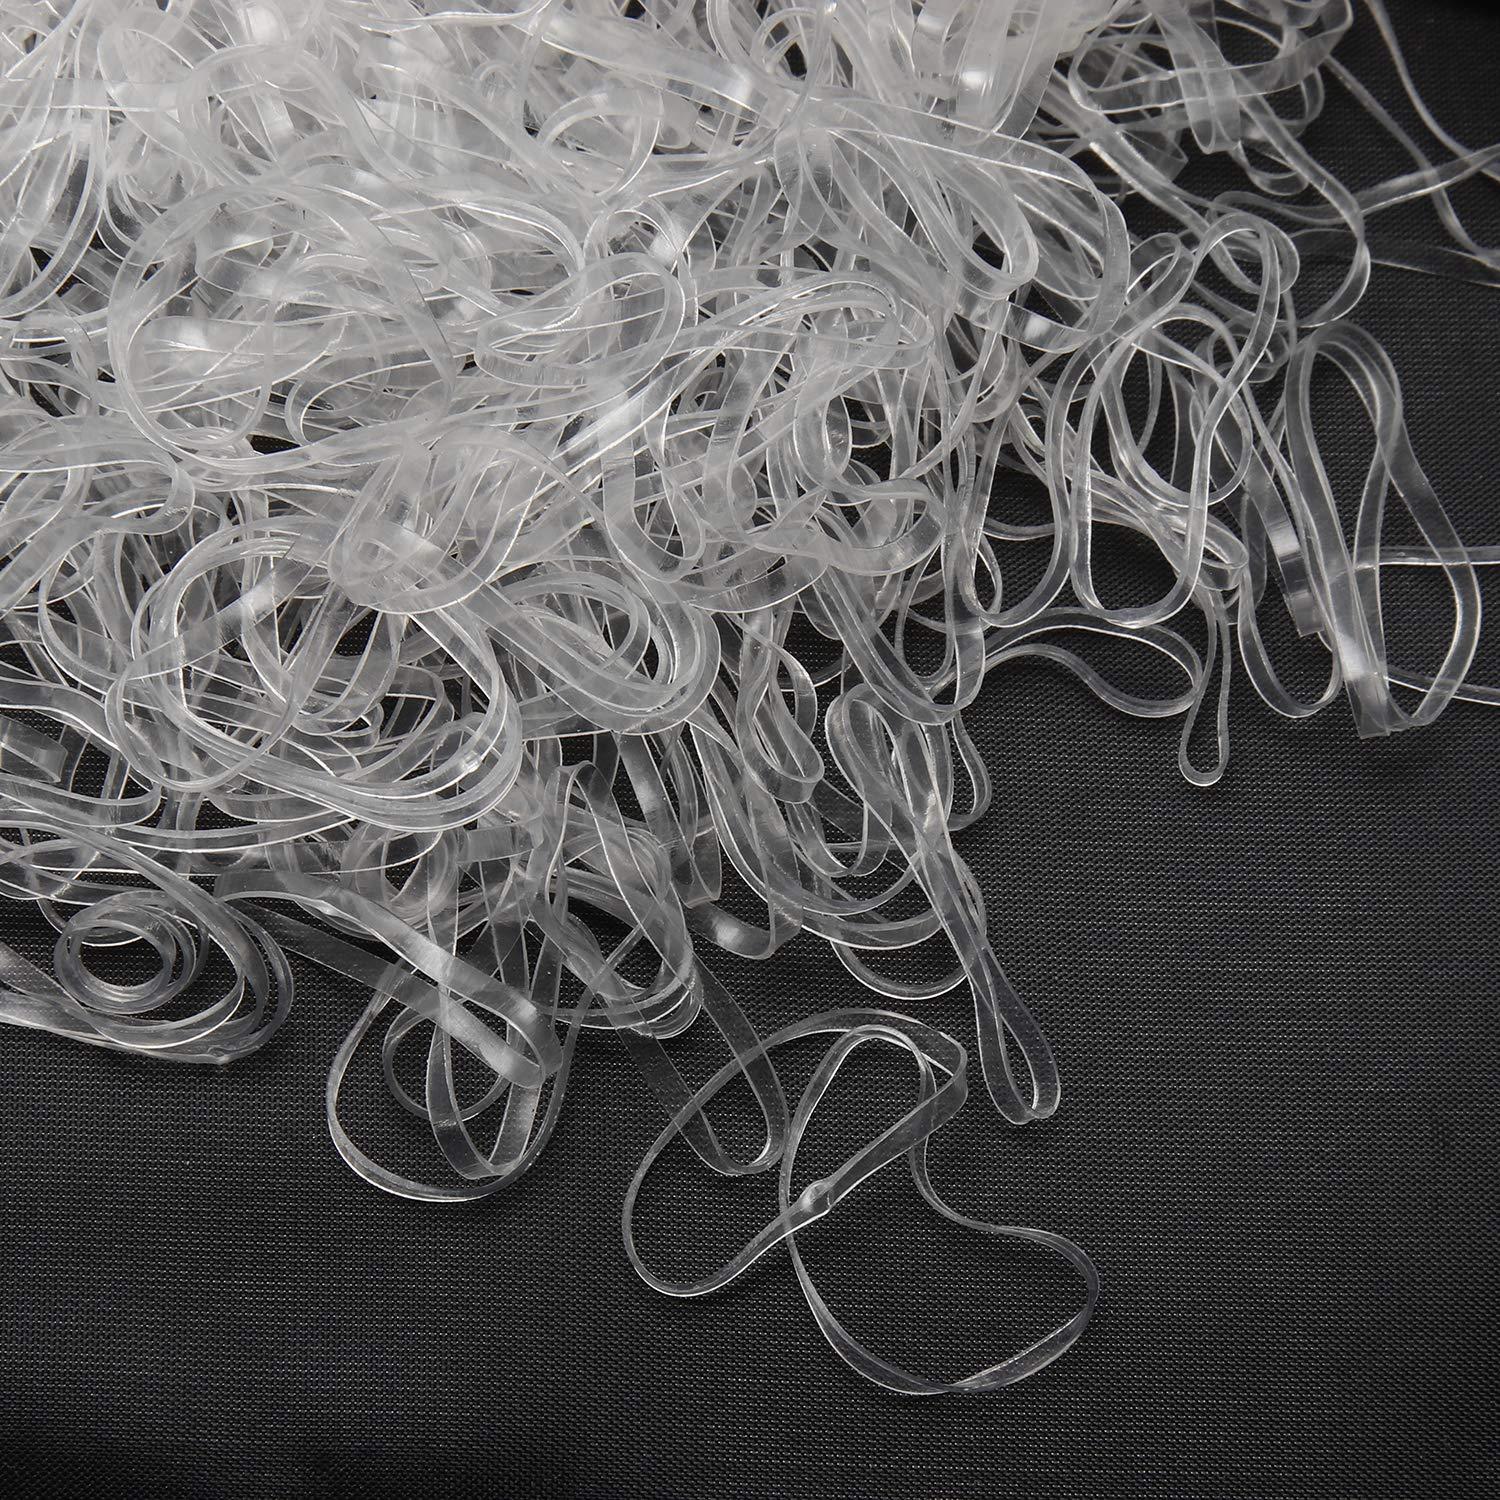 1500 Pcs Small clear hair elastics, clear elastic hair band, Soft plastic  hair ties no damage tiny rubber bands for girls